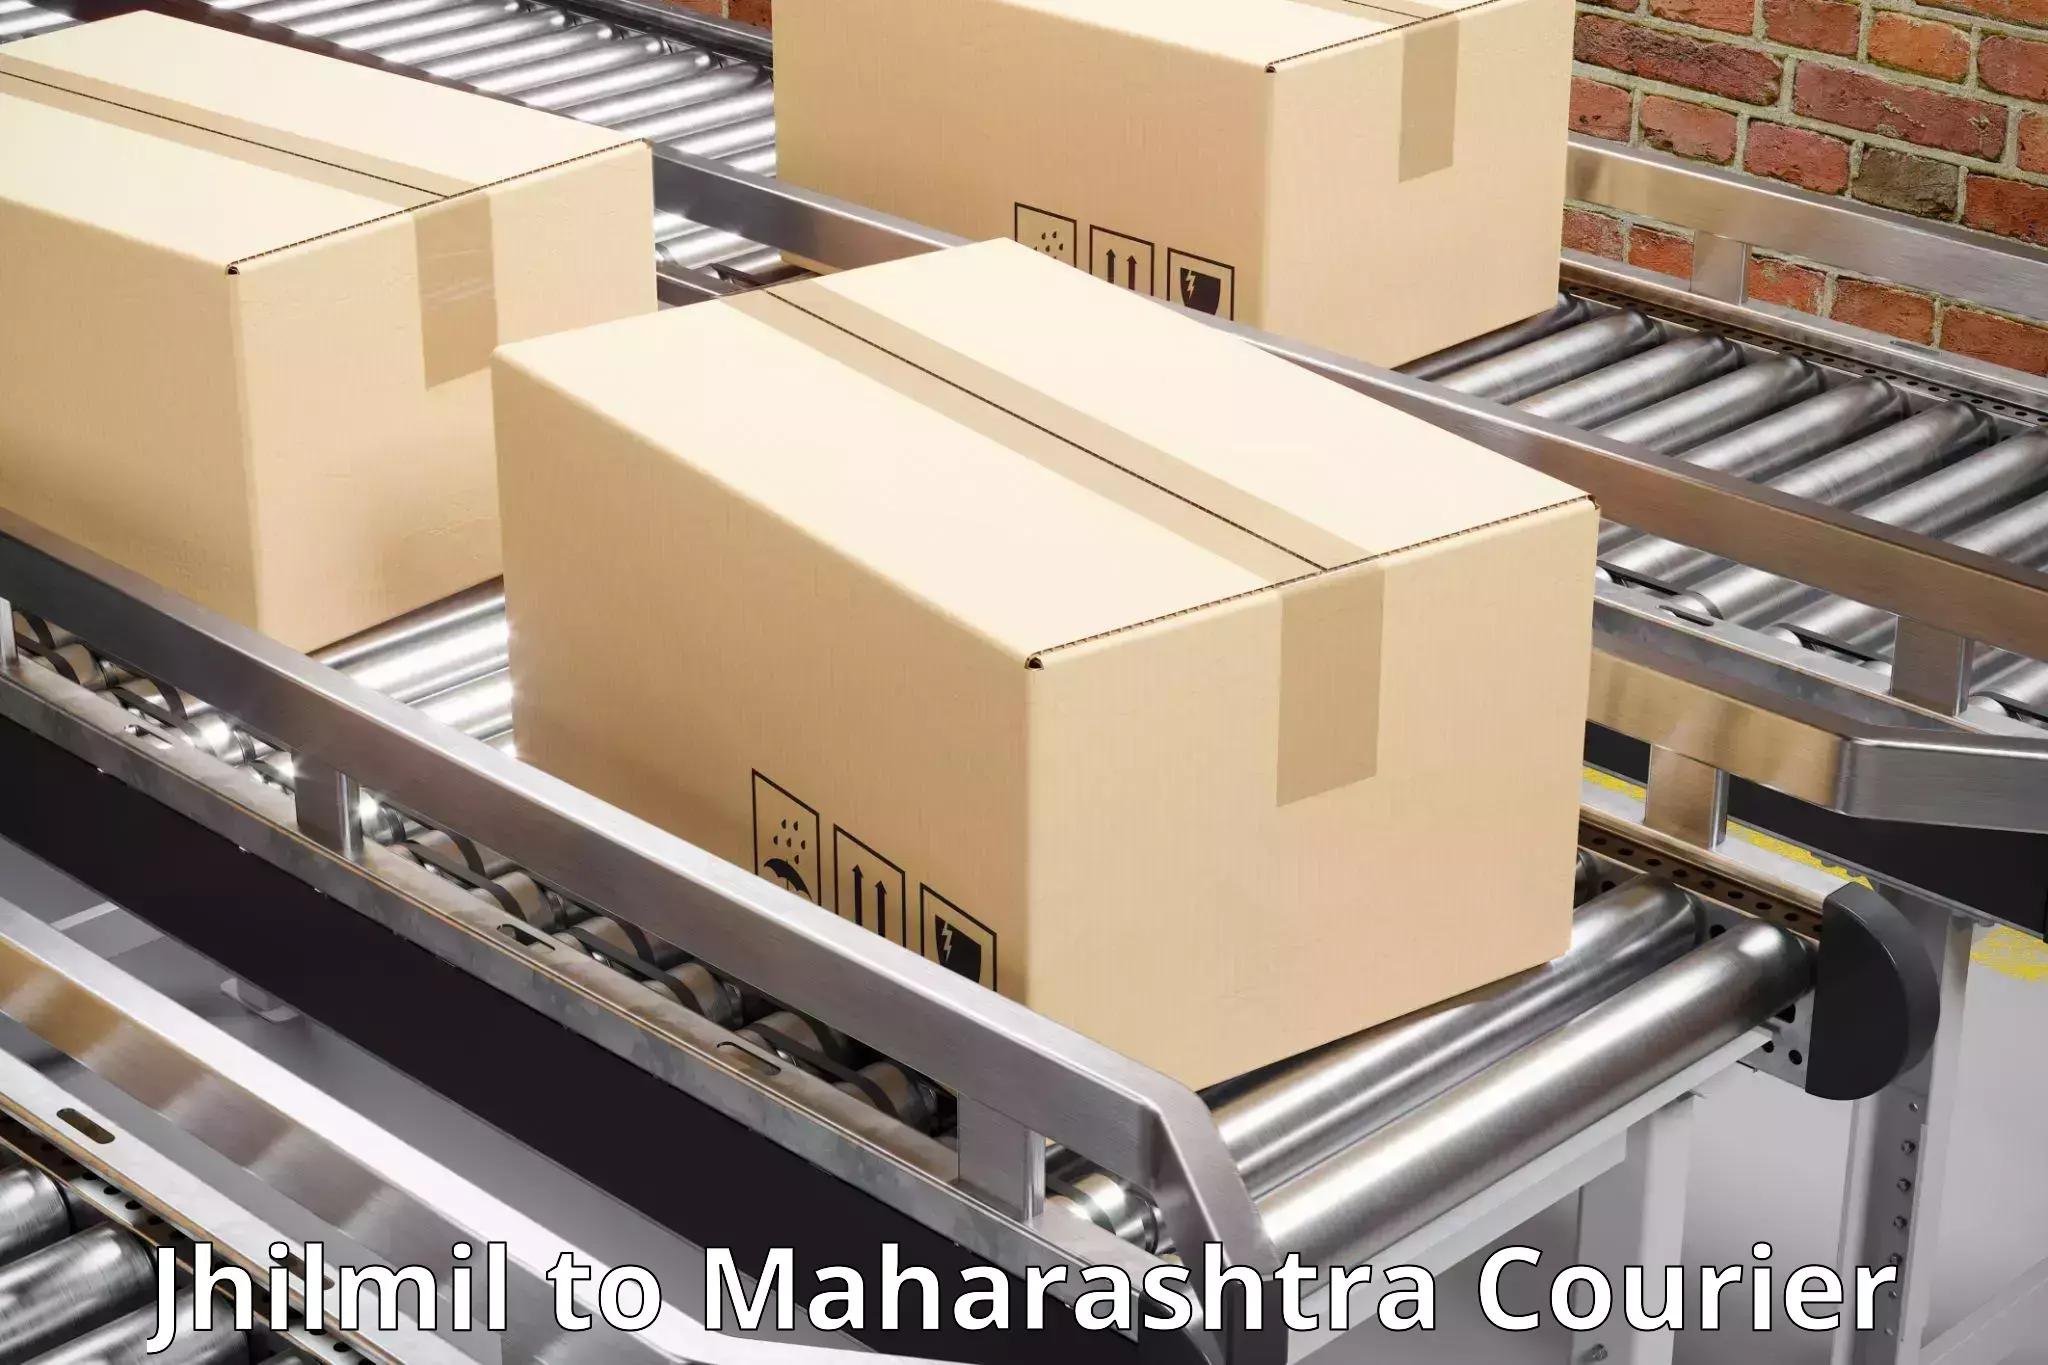 Flexible delivery scheduling Jhilmil to IIIT Nagpur